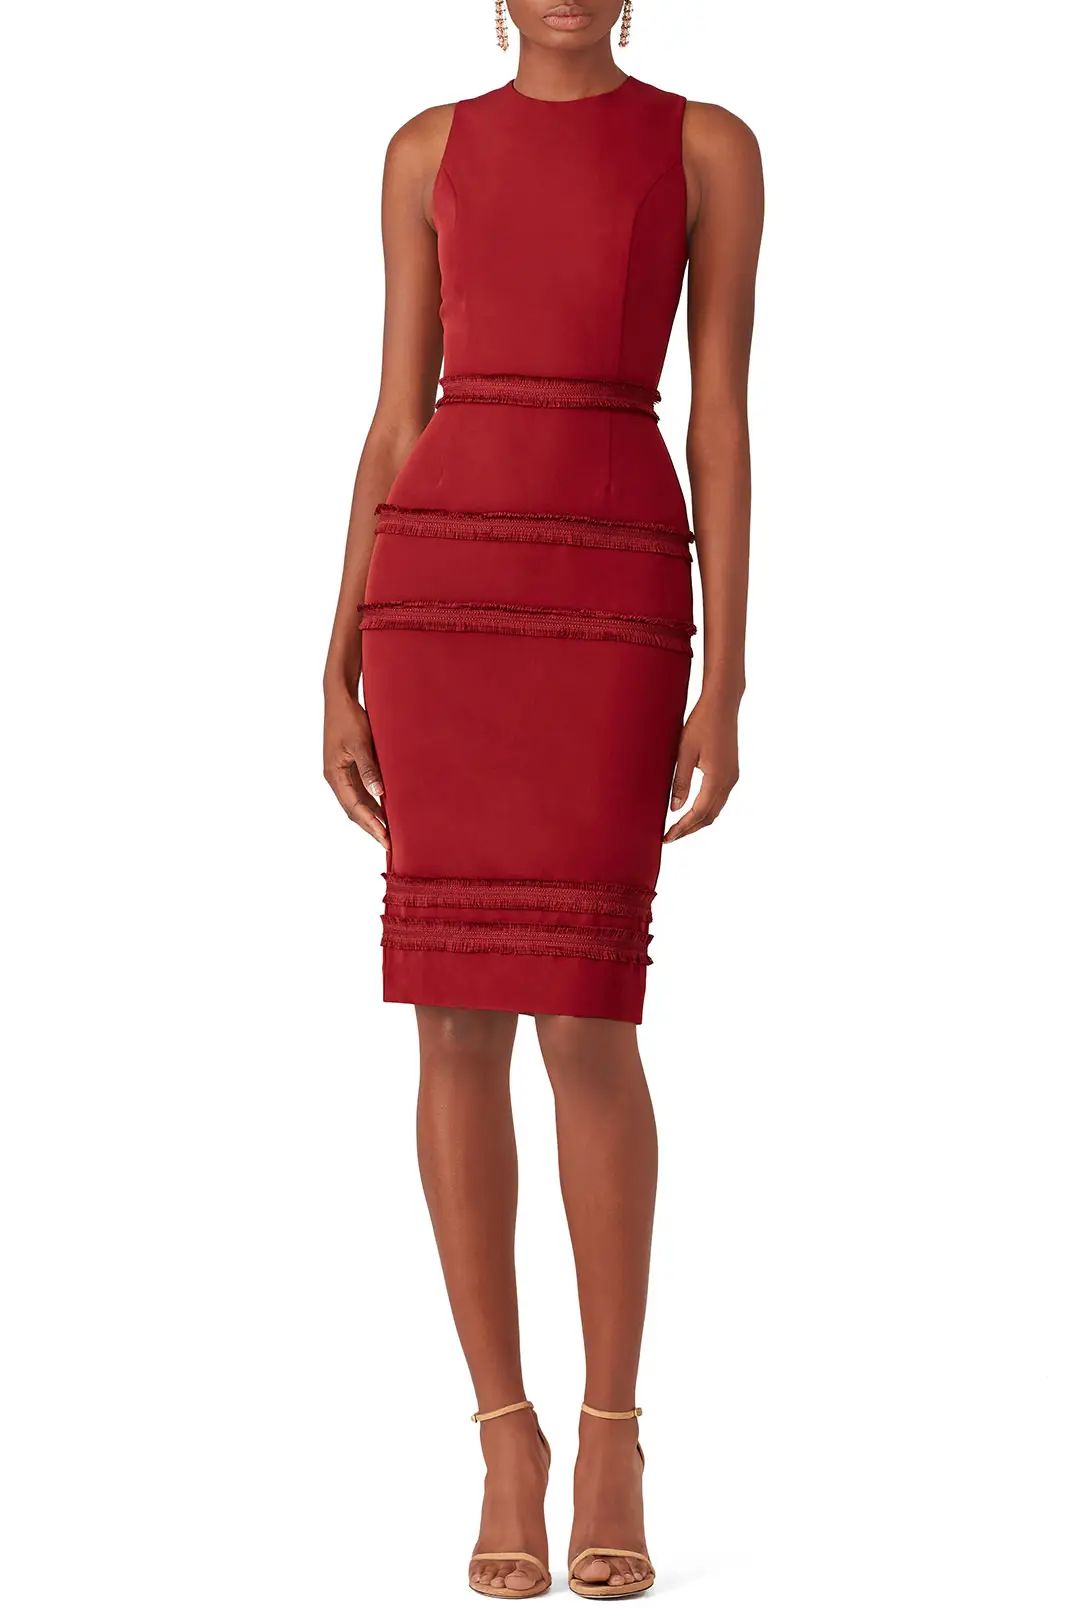 FINDERS KEEPERS Red Fringed Dress | Rent The Runway